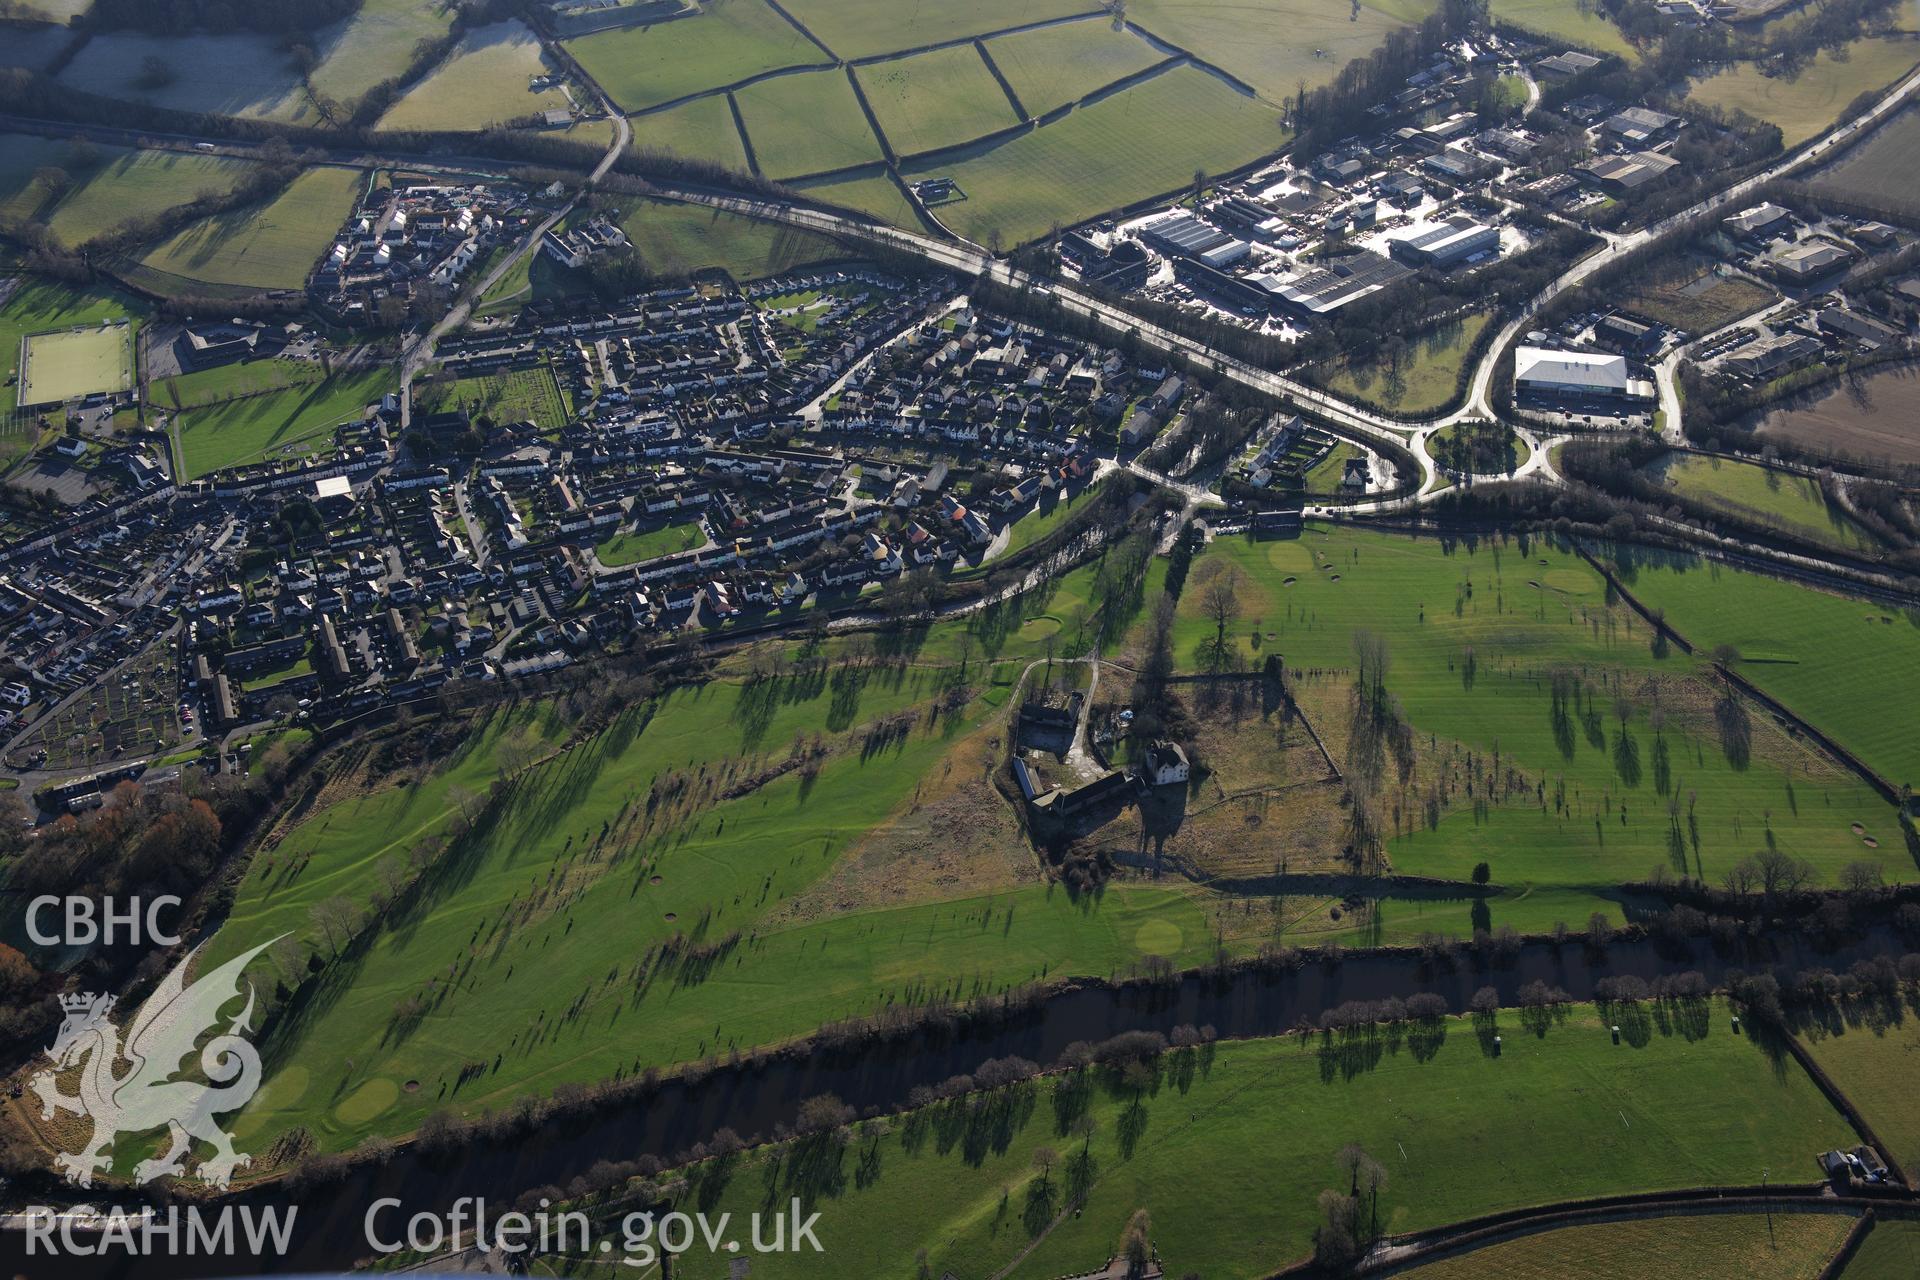 Newtown Farm with associated house, outbuildings and garden features, and the town of Brecon beyond. Oblique aerial photograph taken during the Royal Commission?s programme of archaeological aerial reconnaissance by Toby Driver on 15th January 2013.